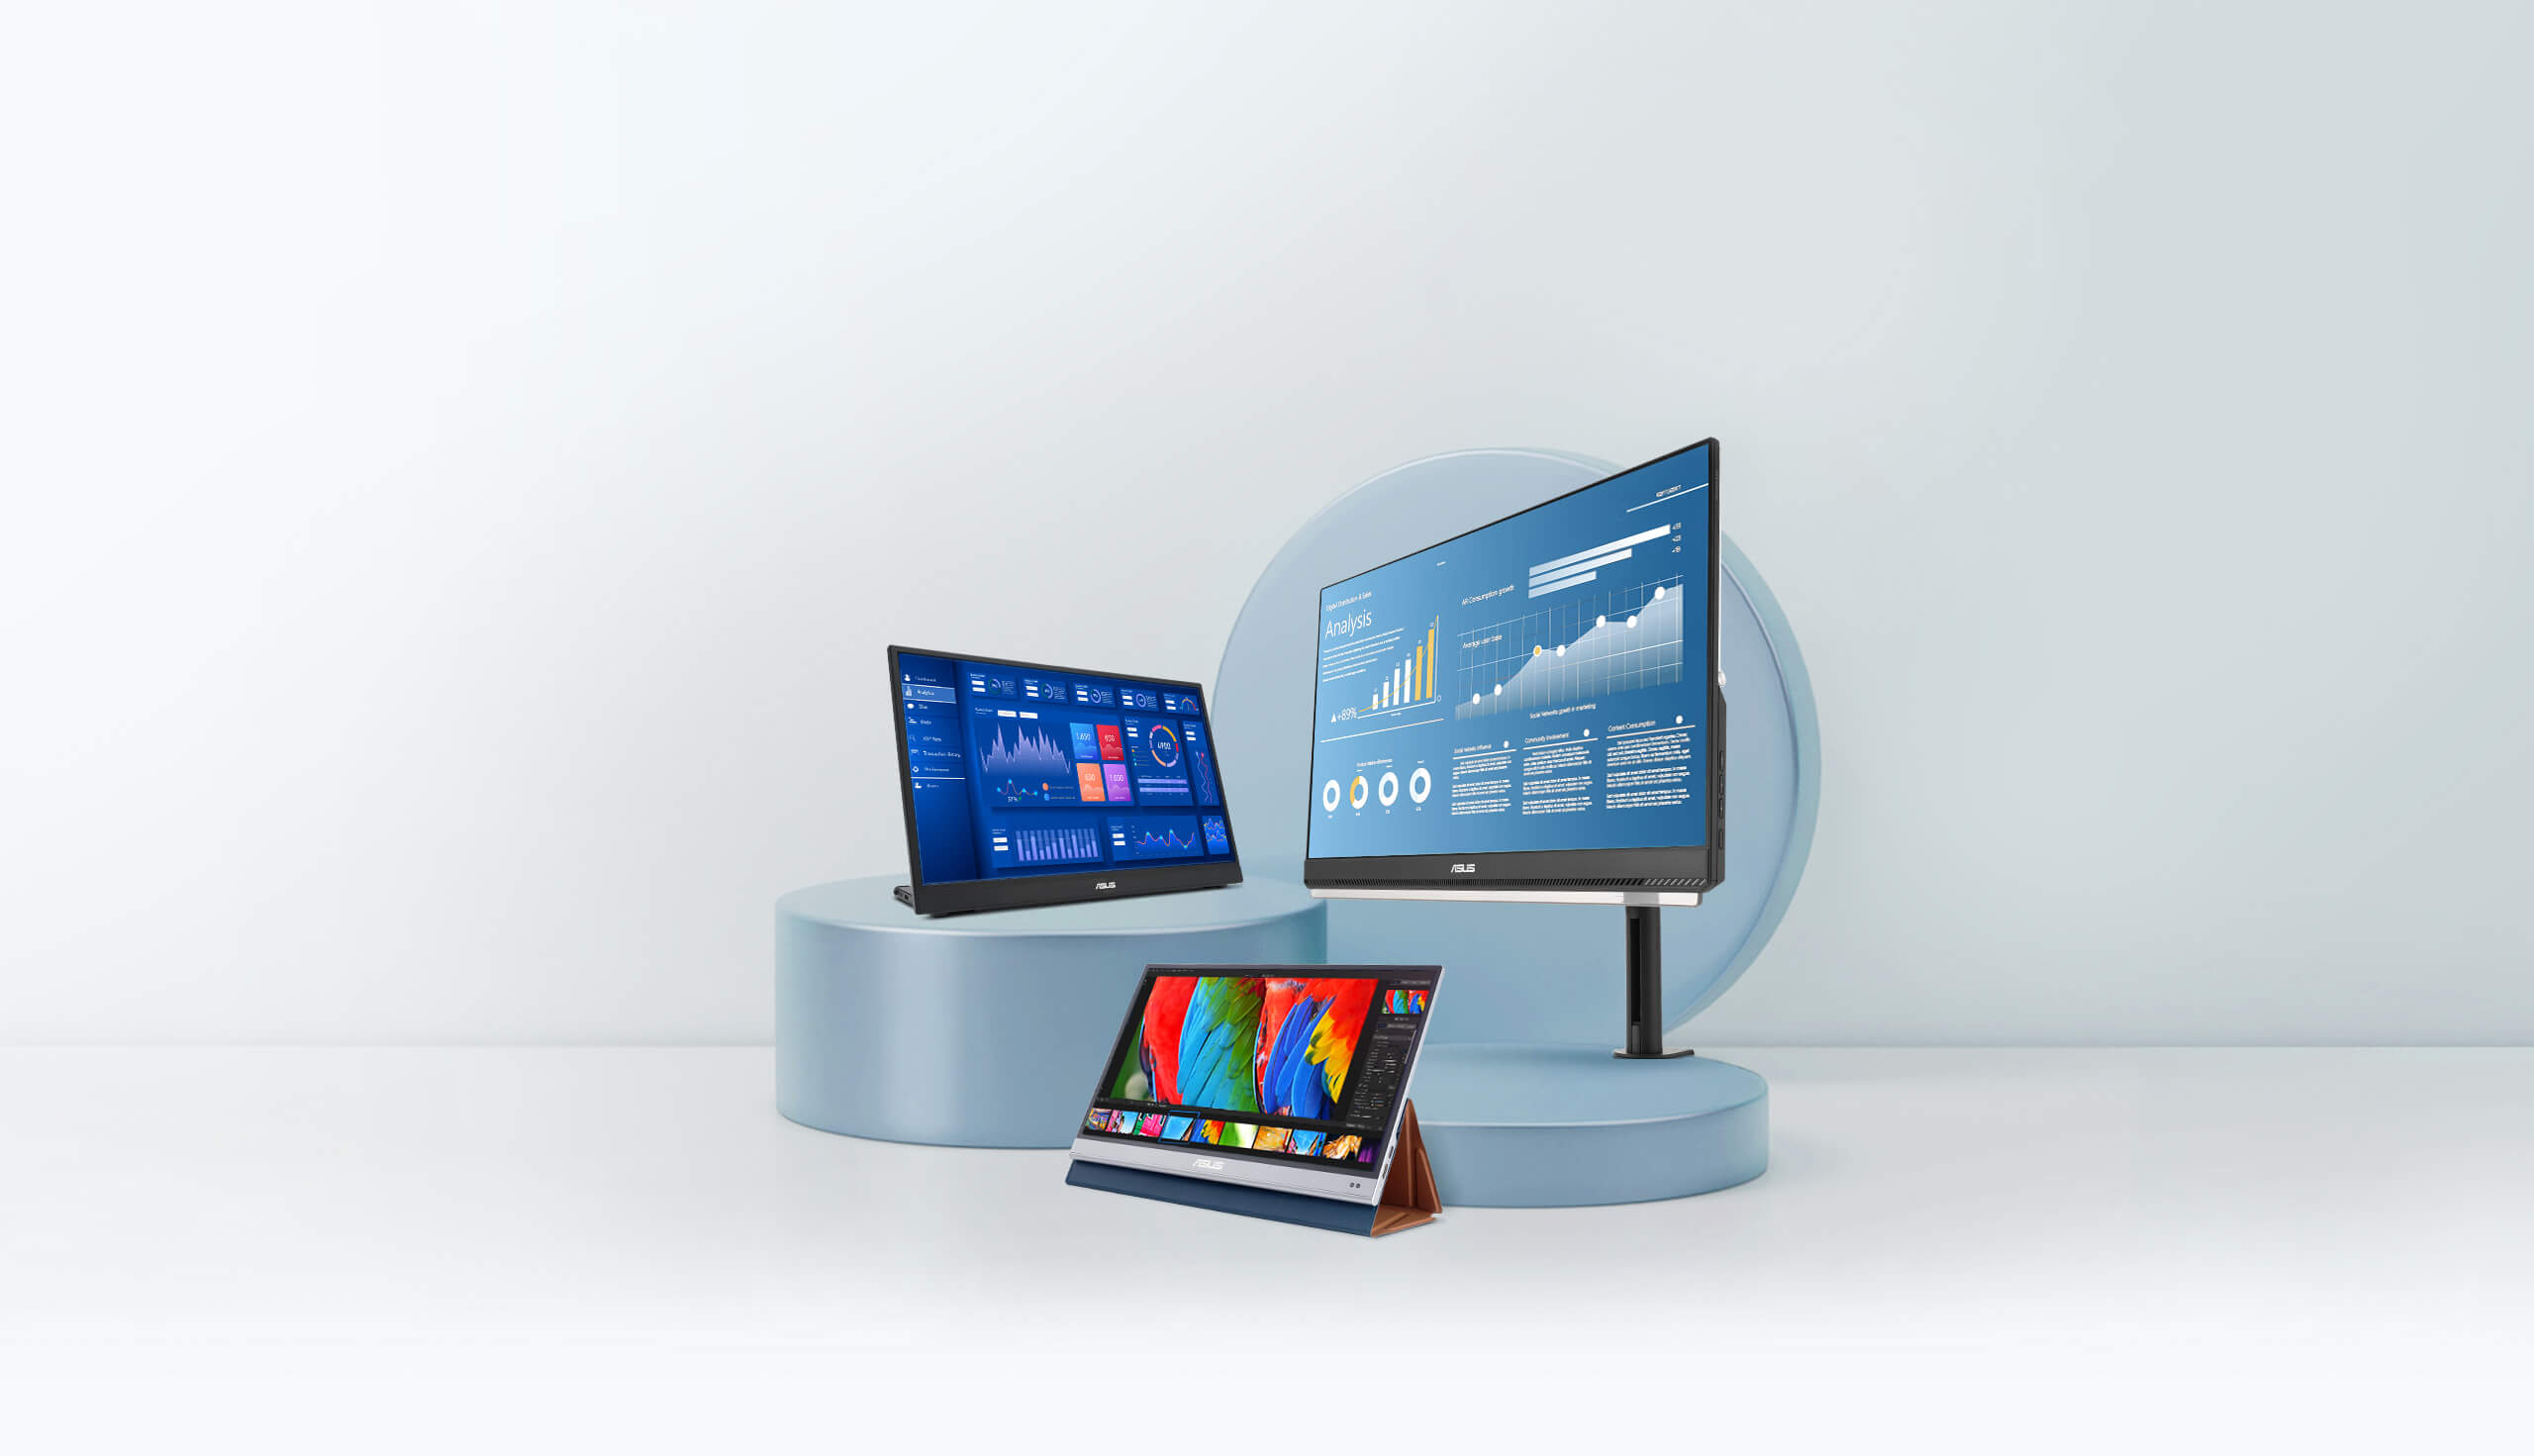 Three ZenScreen portable monitors display on the podium, the model MB16QHG, MQ16AH, and MB249C from left to right